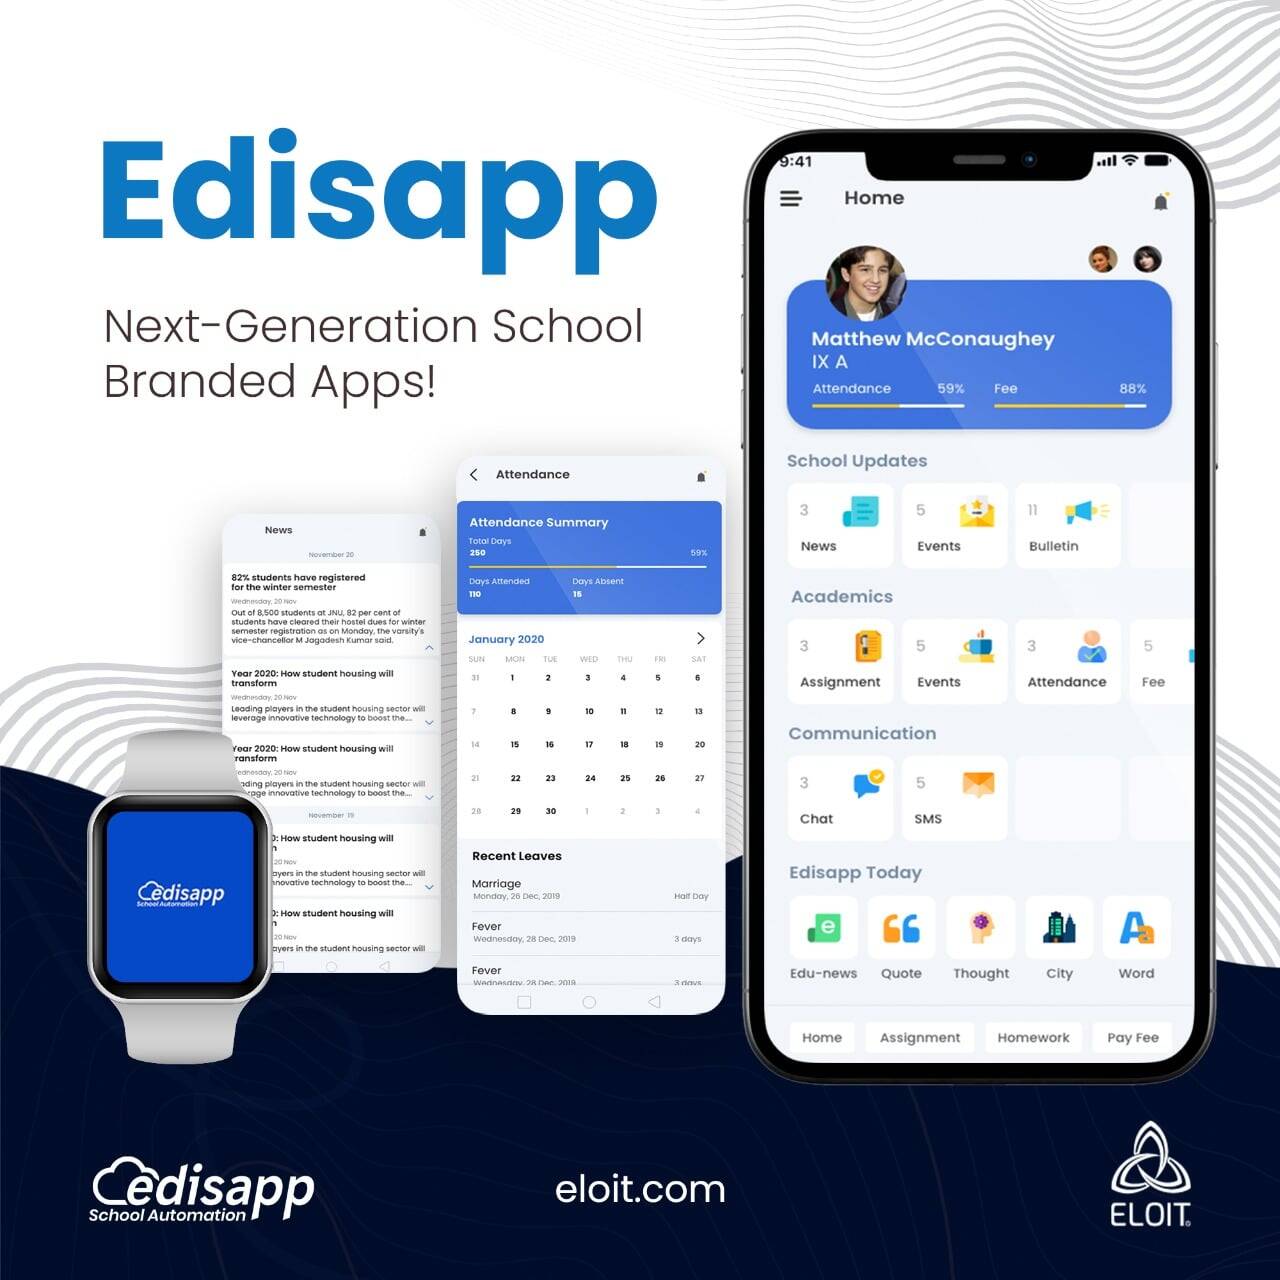 Edisapp Mobile Apps integrated with the Best School Management Software